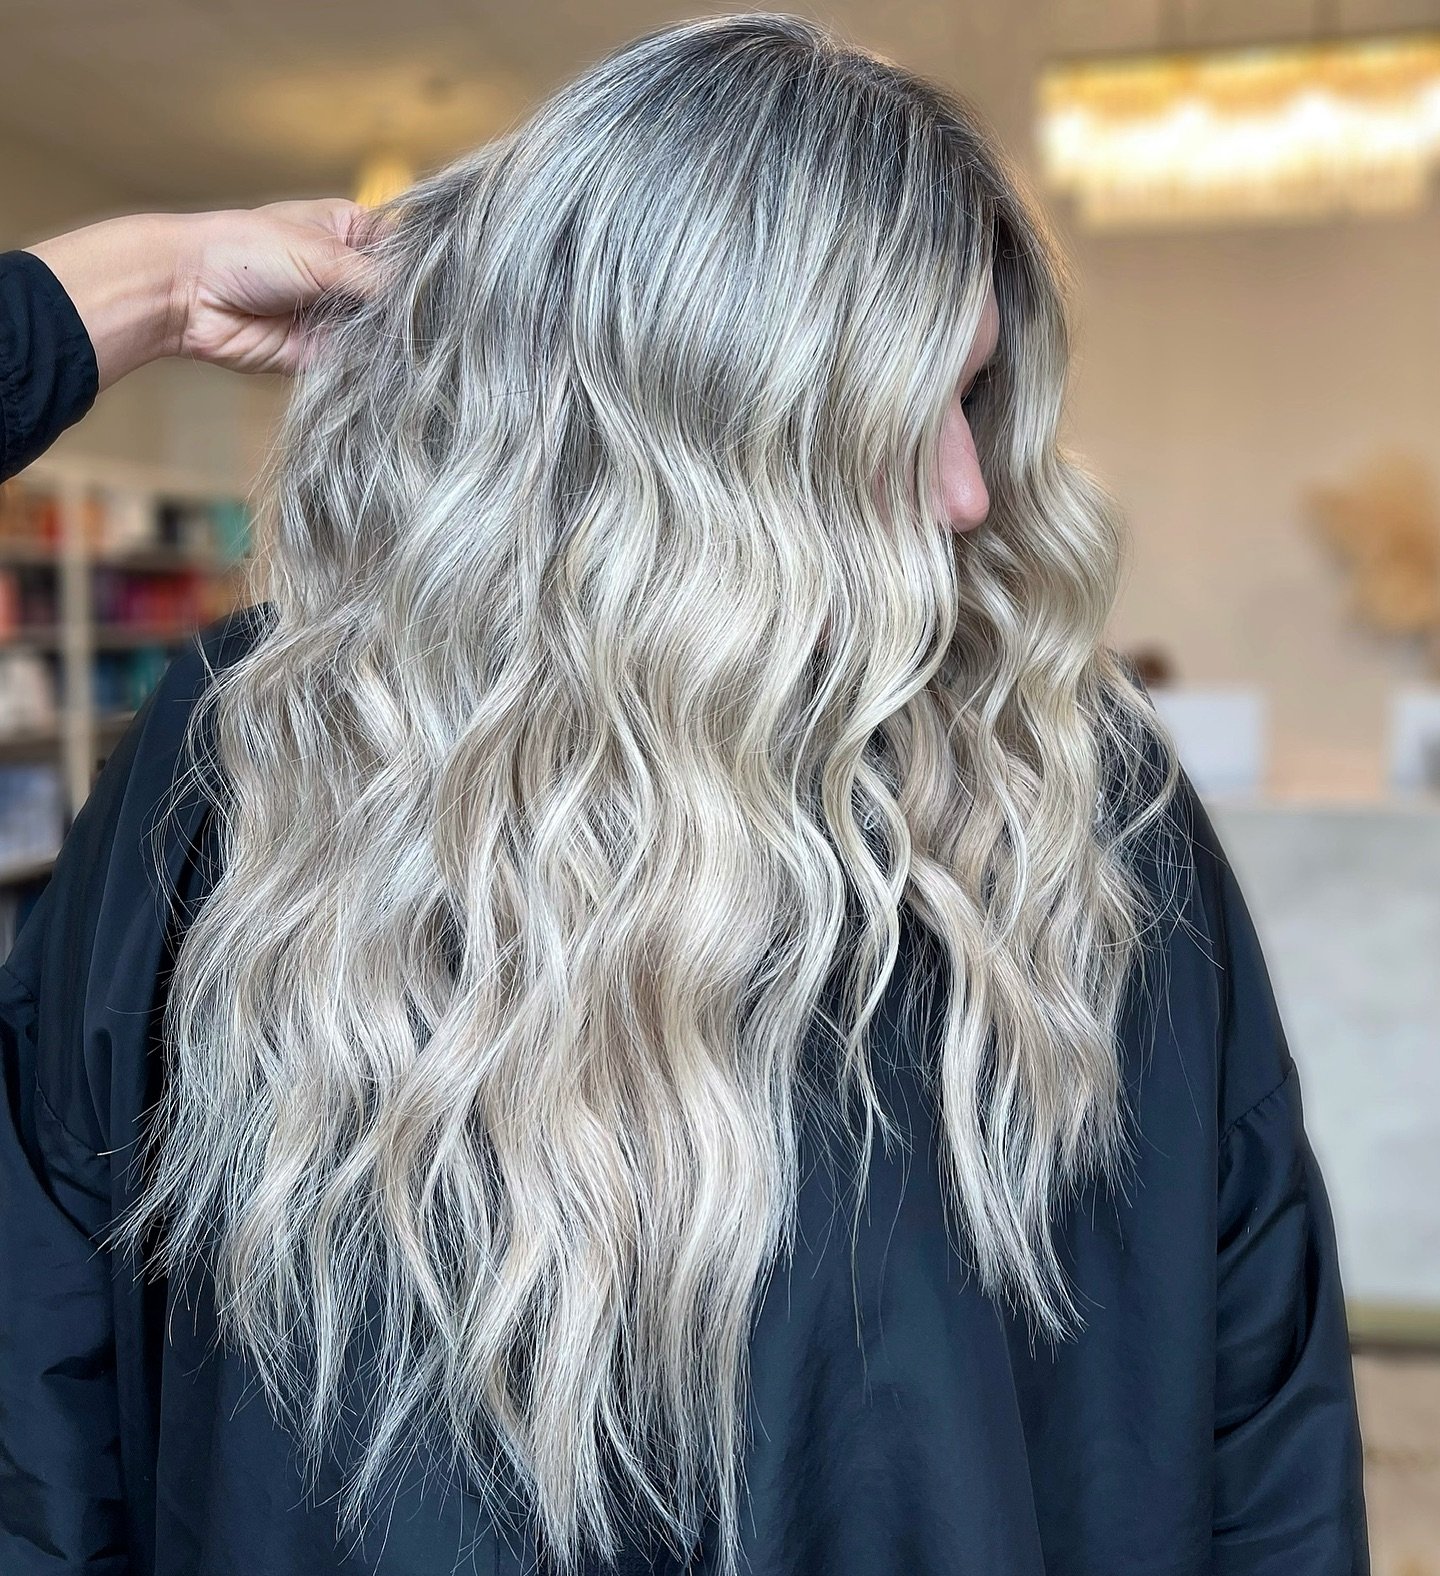 This 22&rdquo; volume weft is giving us everything we needed!

Hair by Tori 

Interested in hair extensions? Set up a consultation with a stylist.

To make an appointment, give us a call at 517.225.5958 or book online at district308.com/book

.
.
.
.